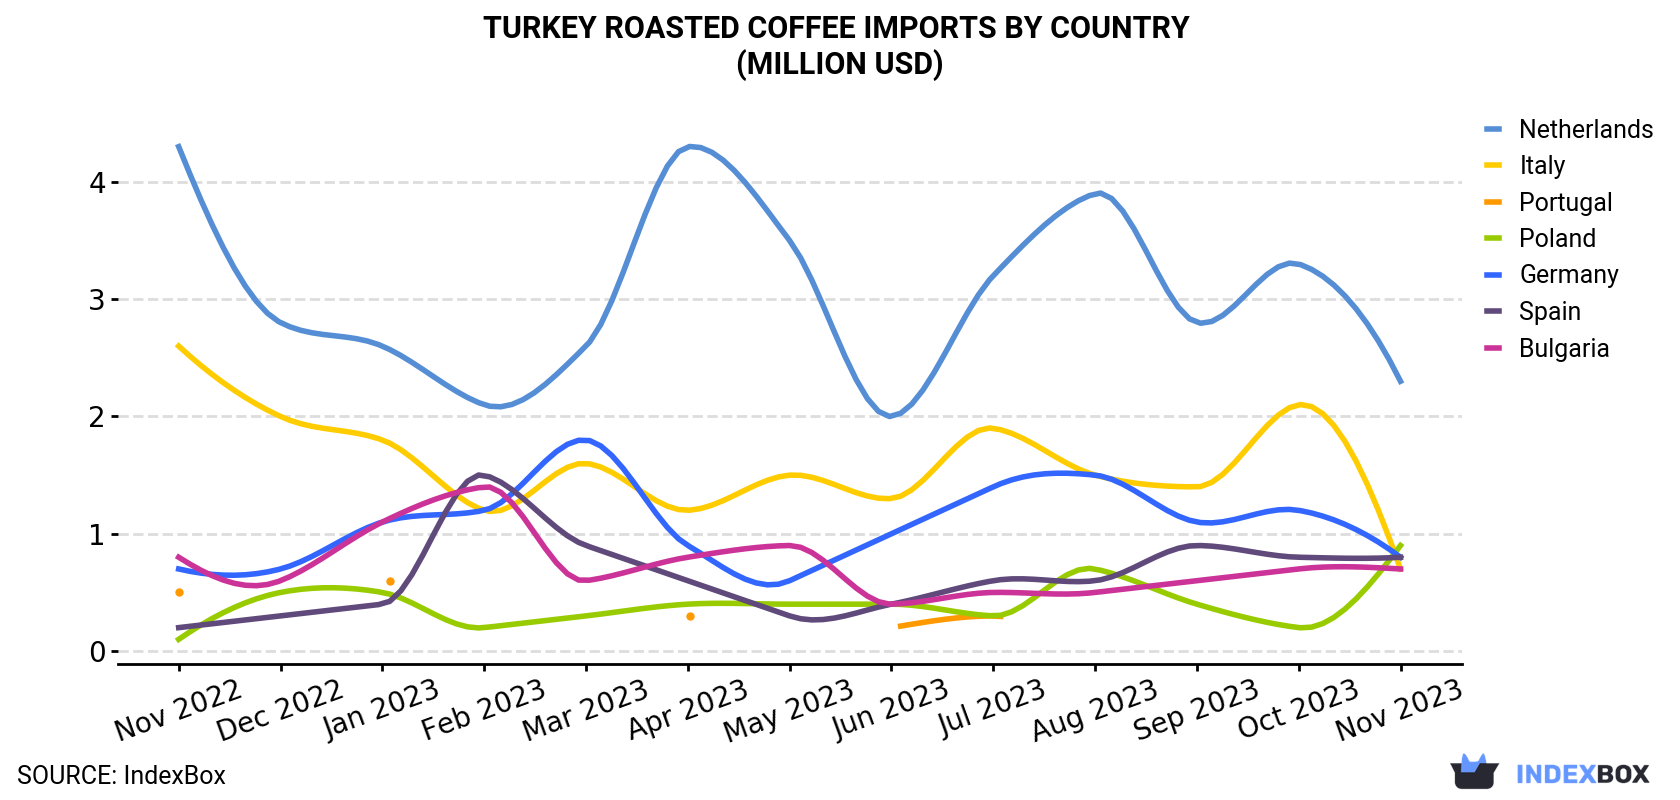 Significant Decrease in Turkey's November 2023 Import of Roasted Coffee ...